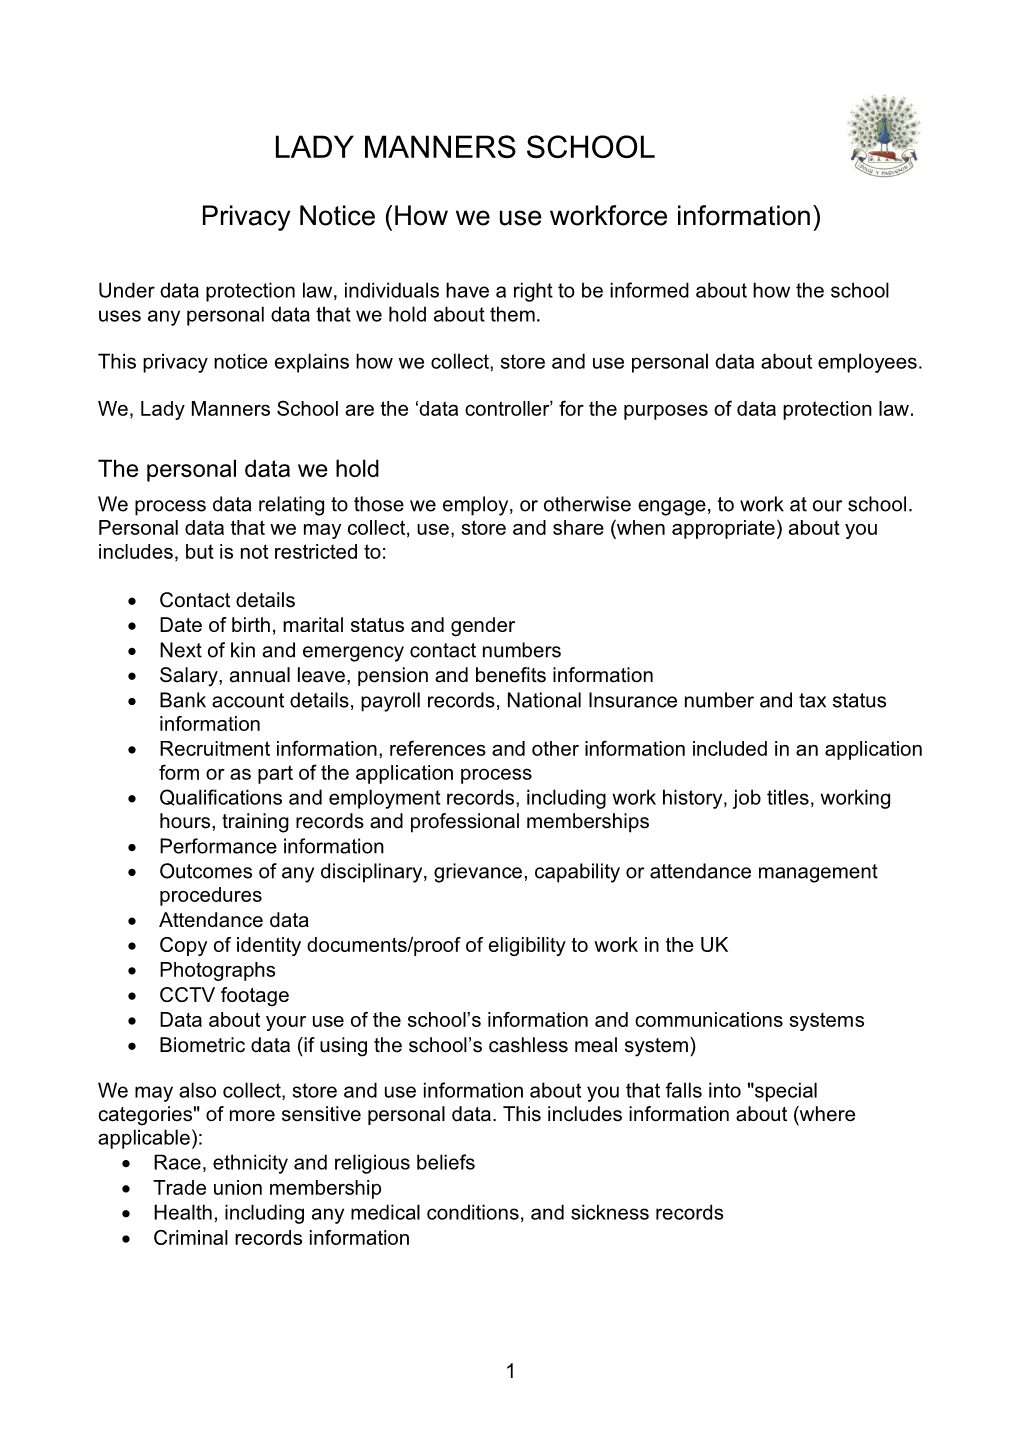 Privacy Notice (How We Use Workforce Information)